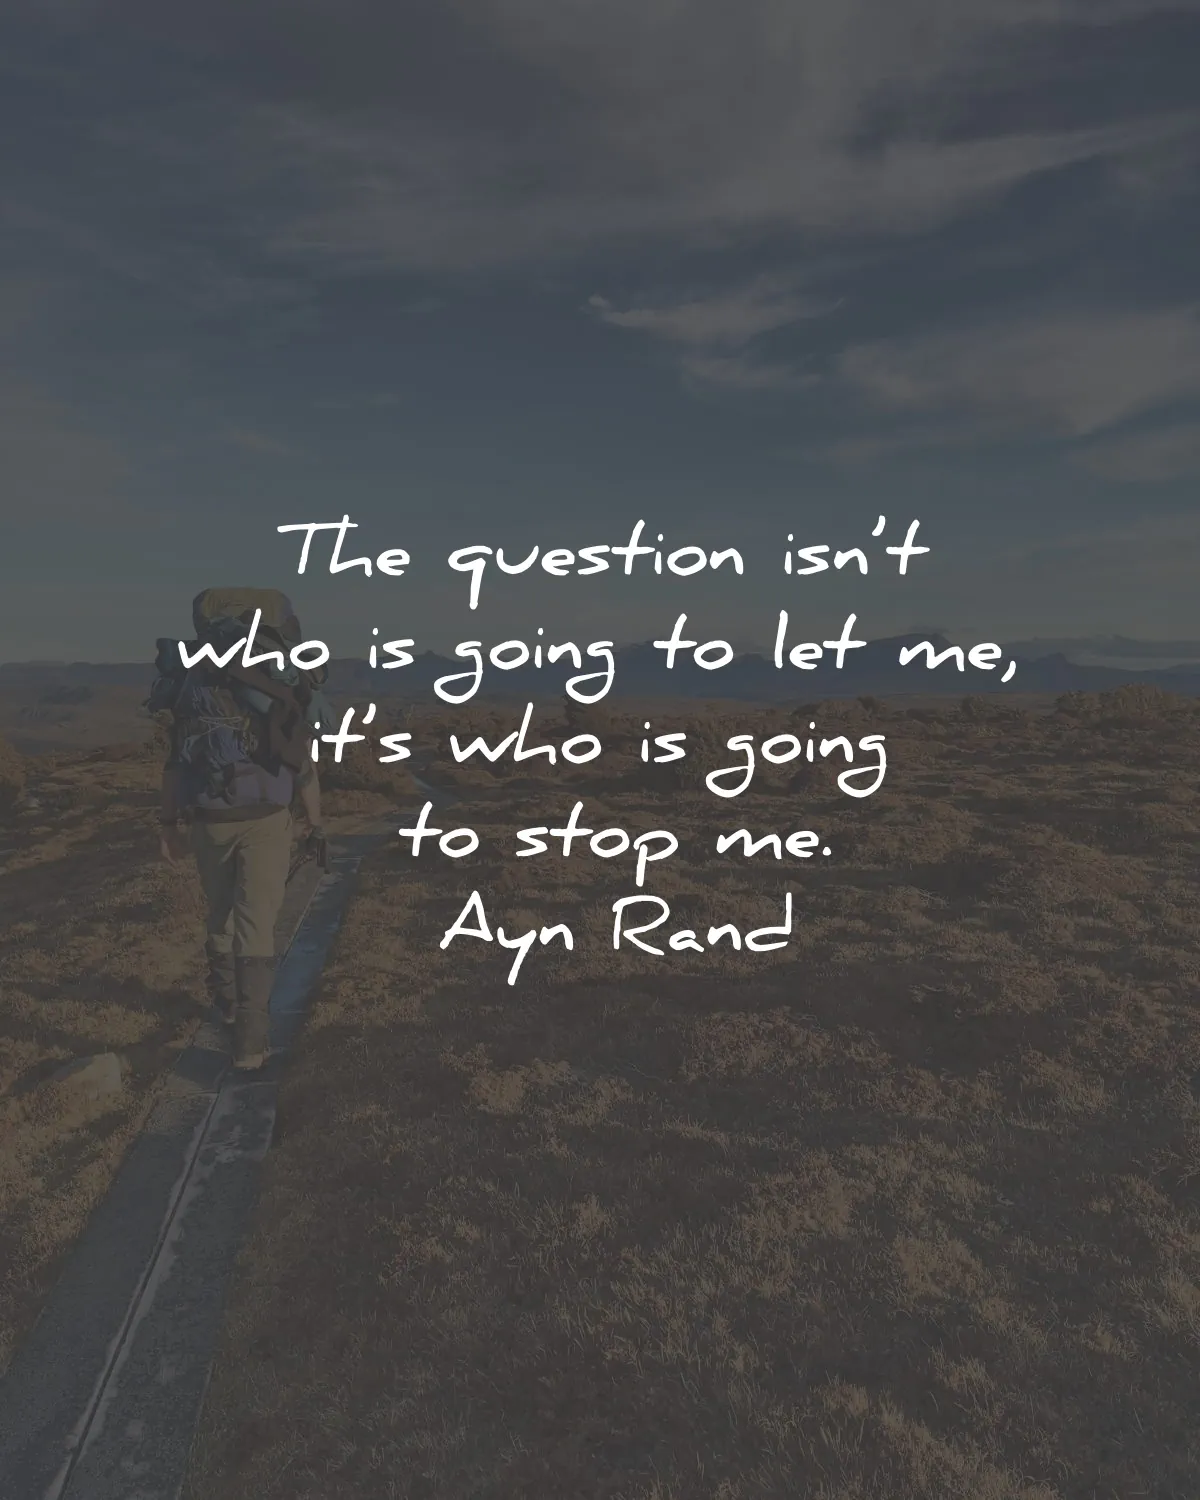 motivational quotes for success question going who going stop ayn rand wisdom